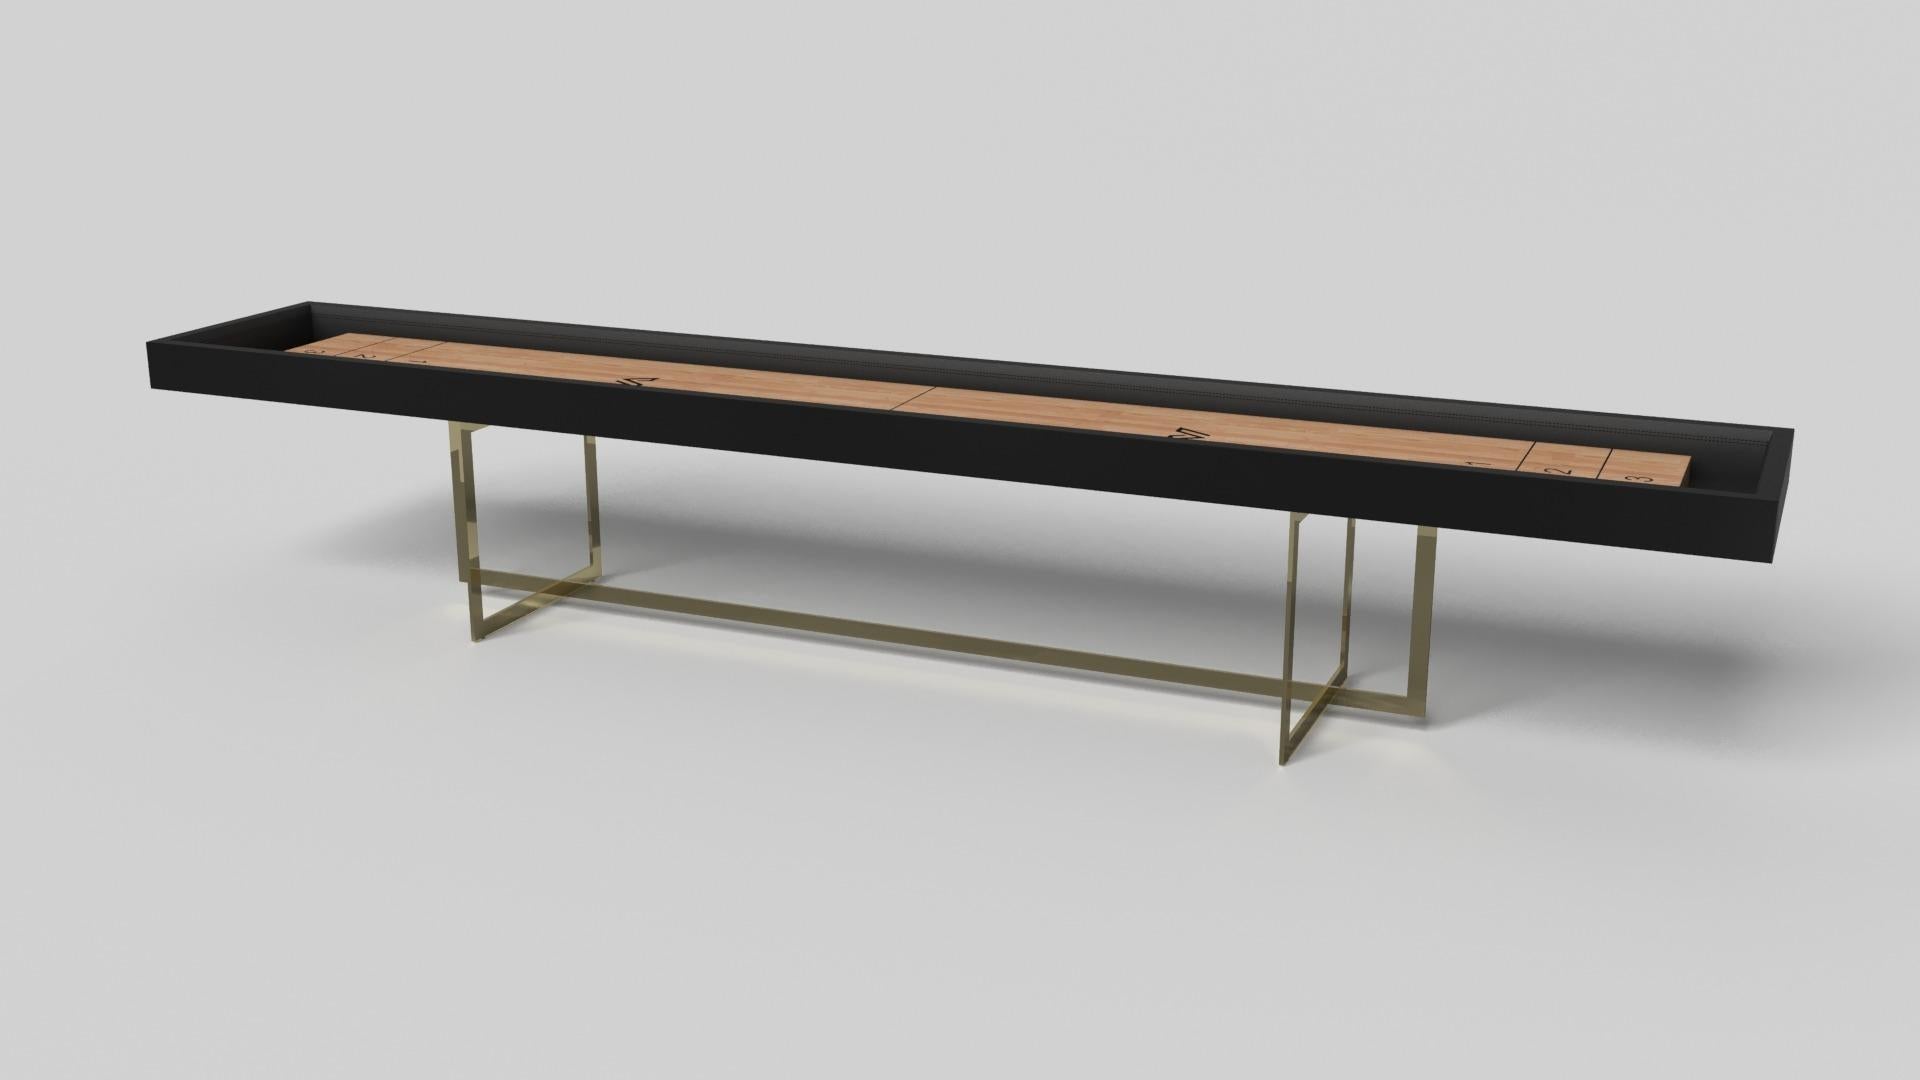 With an open metal foundation, our Beso table is a unique expression of contemporary forms and negative space. This shuffleboard table is handcrafted by our master artisans with a rectangle-in-rectangle base that echoes the angles and edges of a